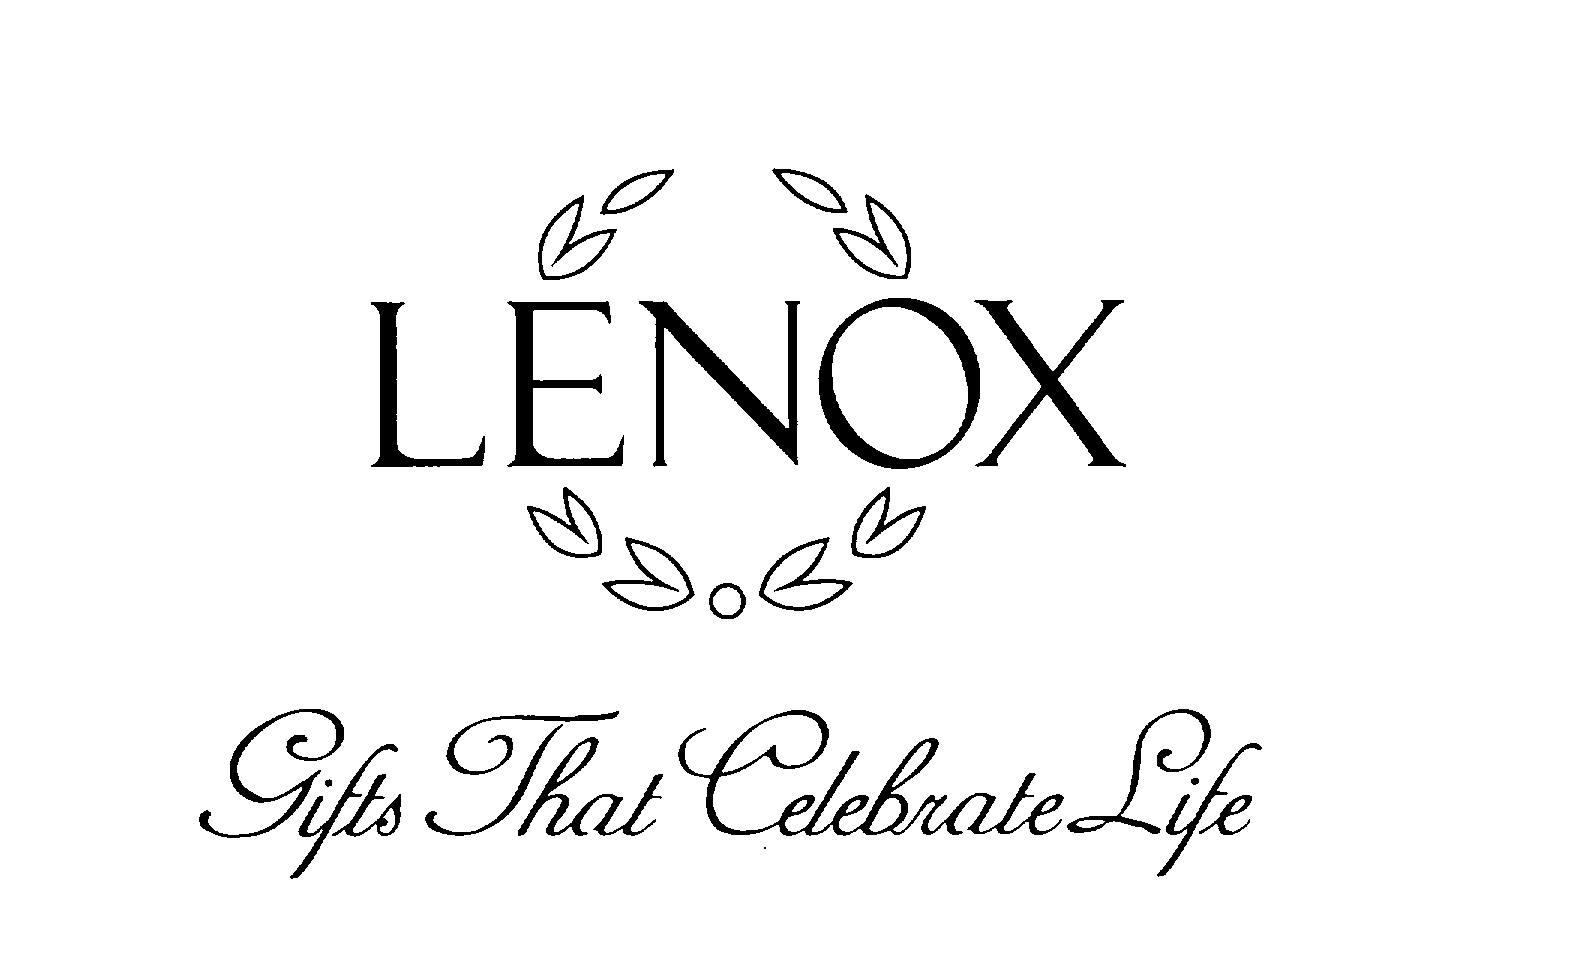  LENOX GIFTS THAT CELEBRATE LIFE